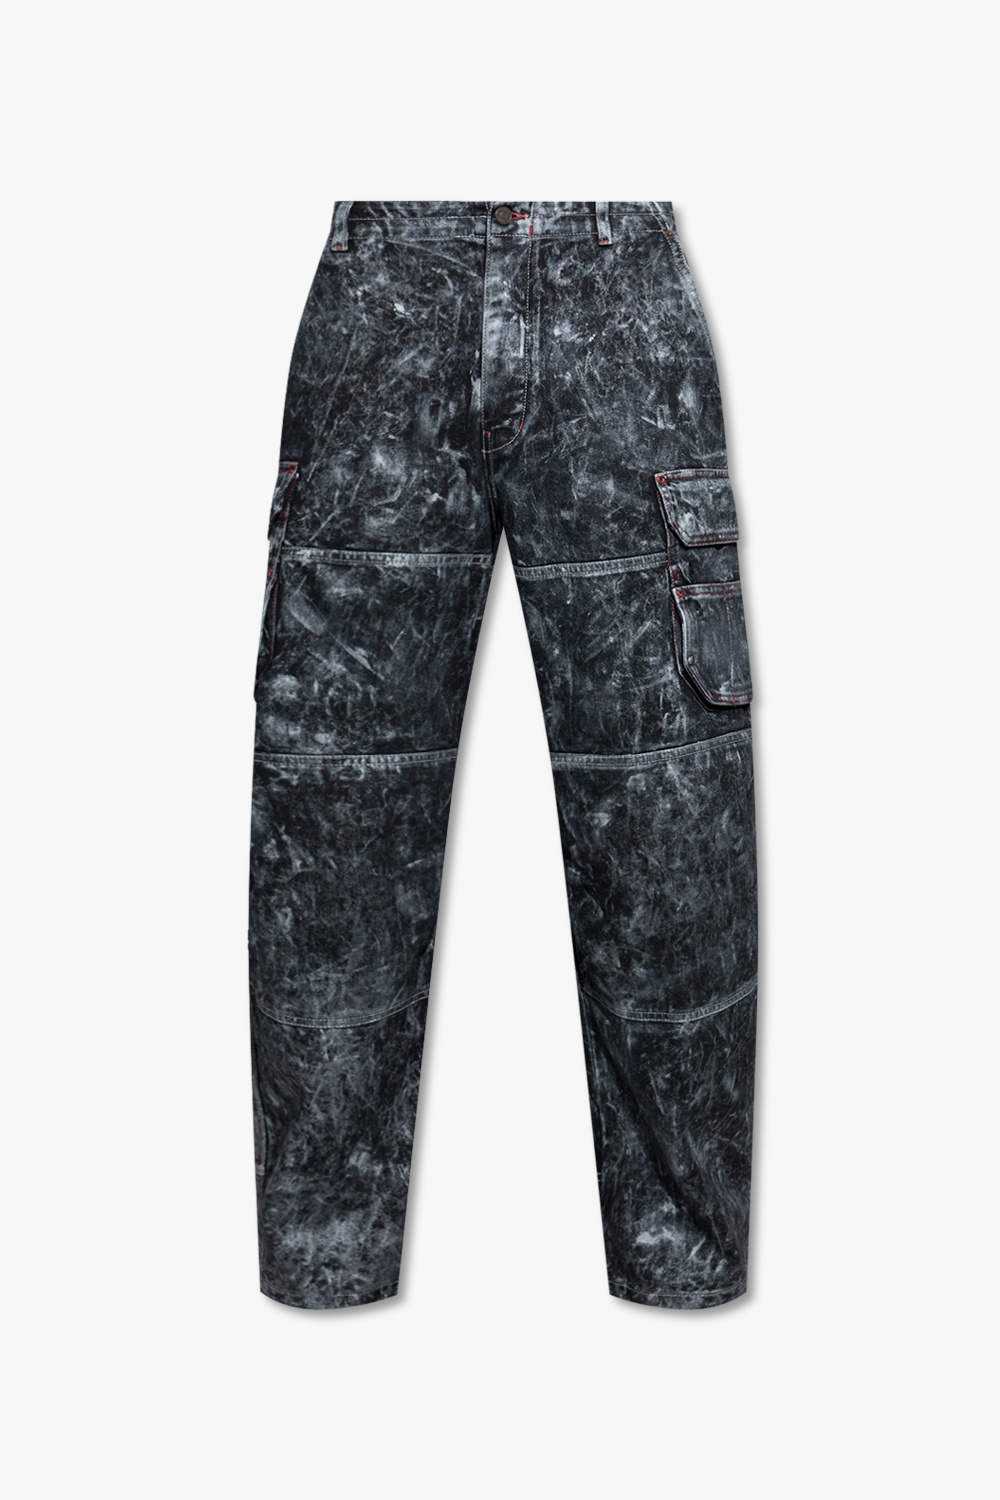 Farm Rio EMBROIDERED PANTS - Relaxed fit jeans - denim blue/multi